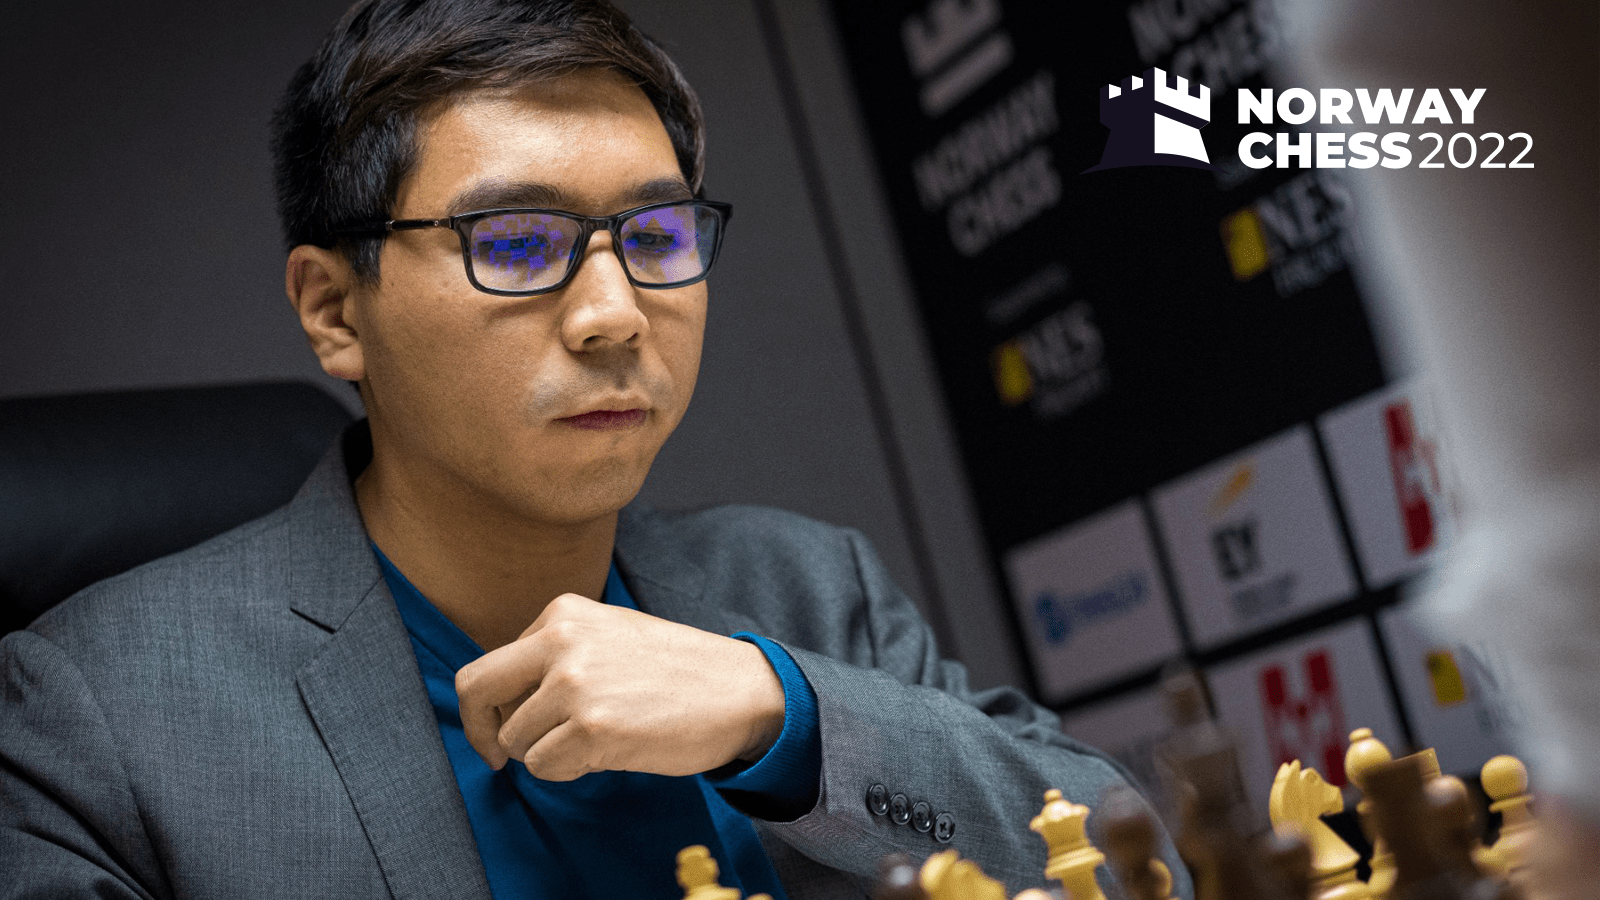 Wesley So Wins Blitz Event Norway Chess 2022